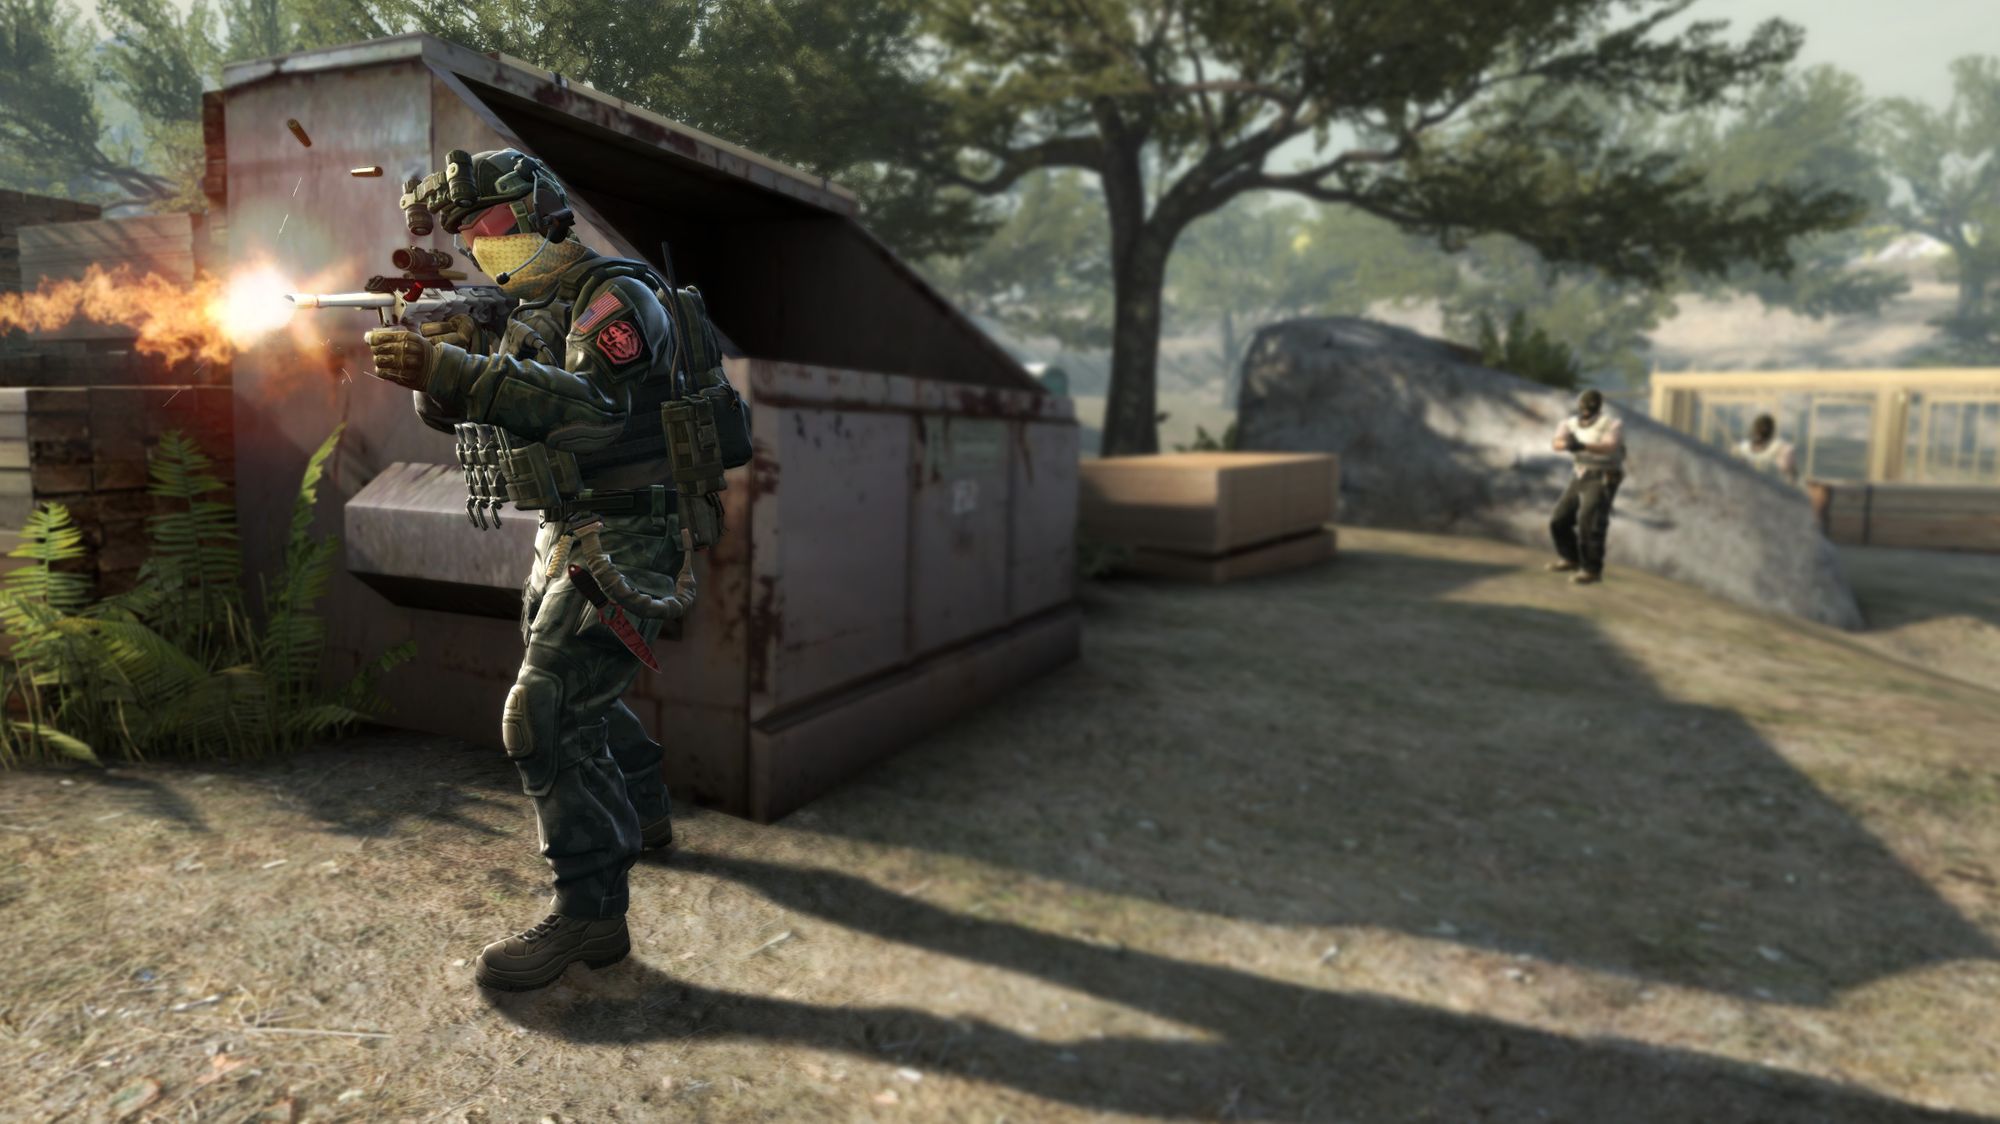 Counter Strike 2: how to get into Steam's limited test mode